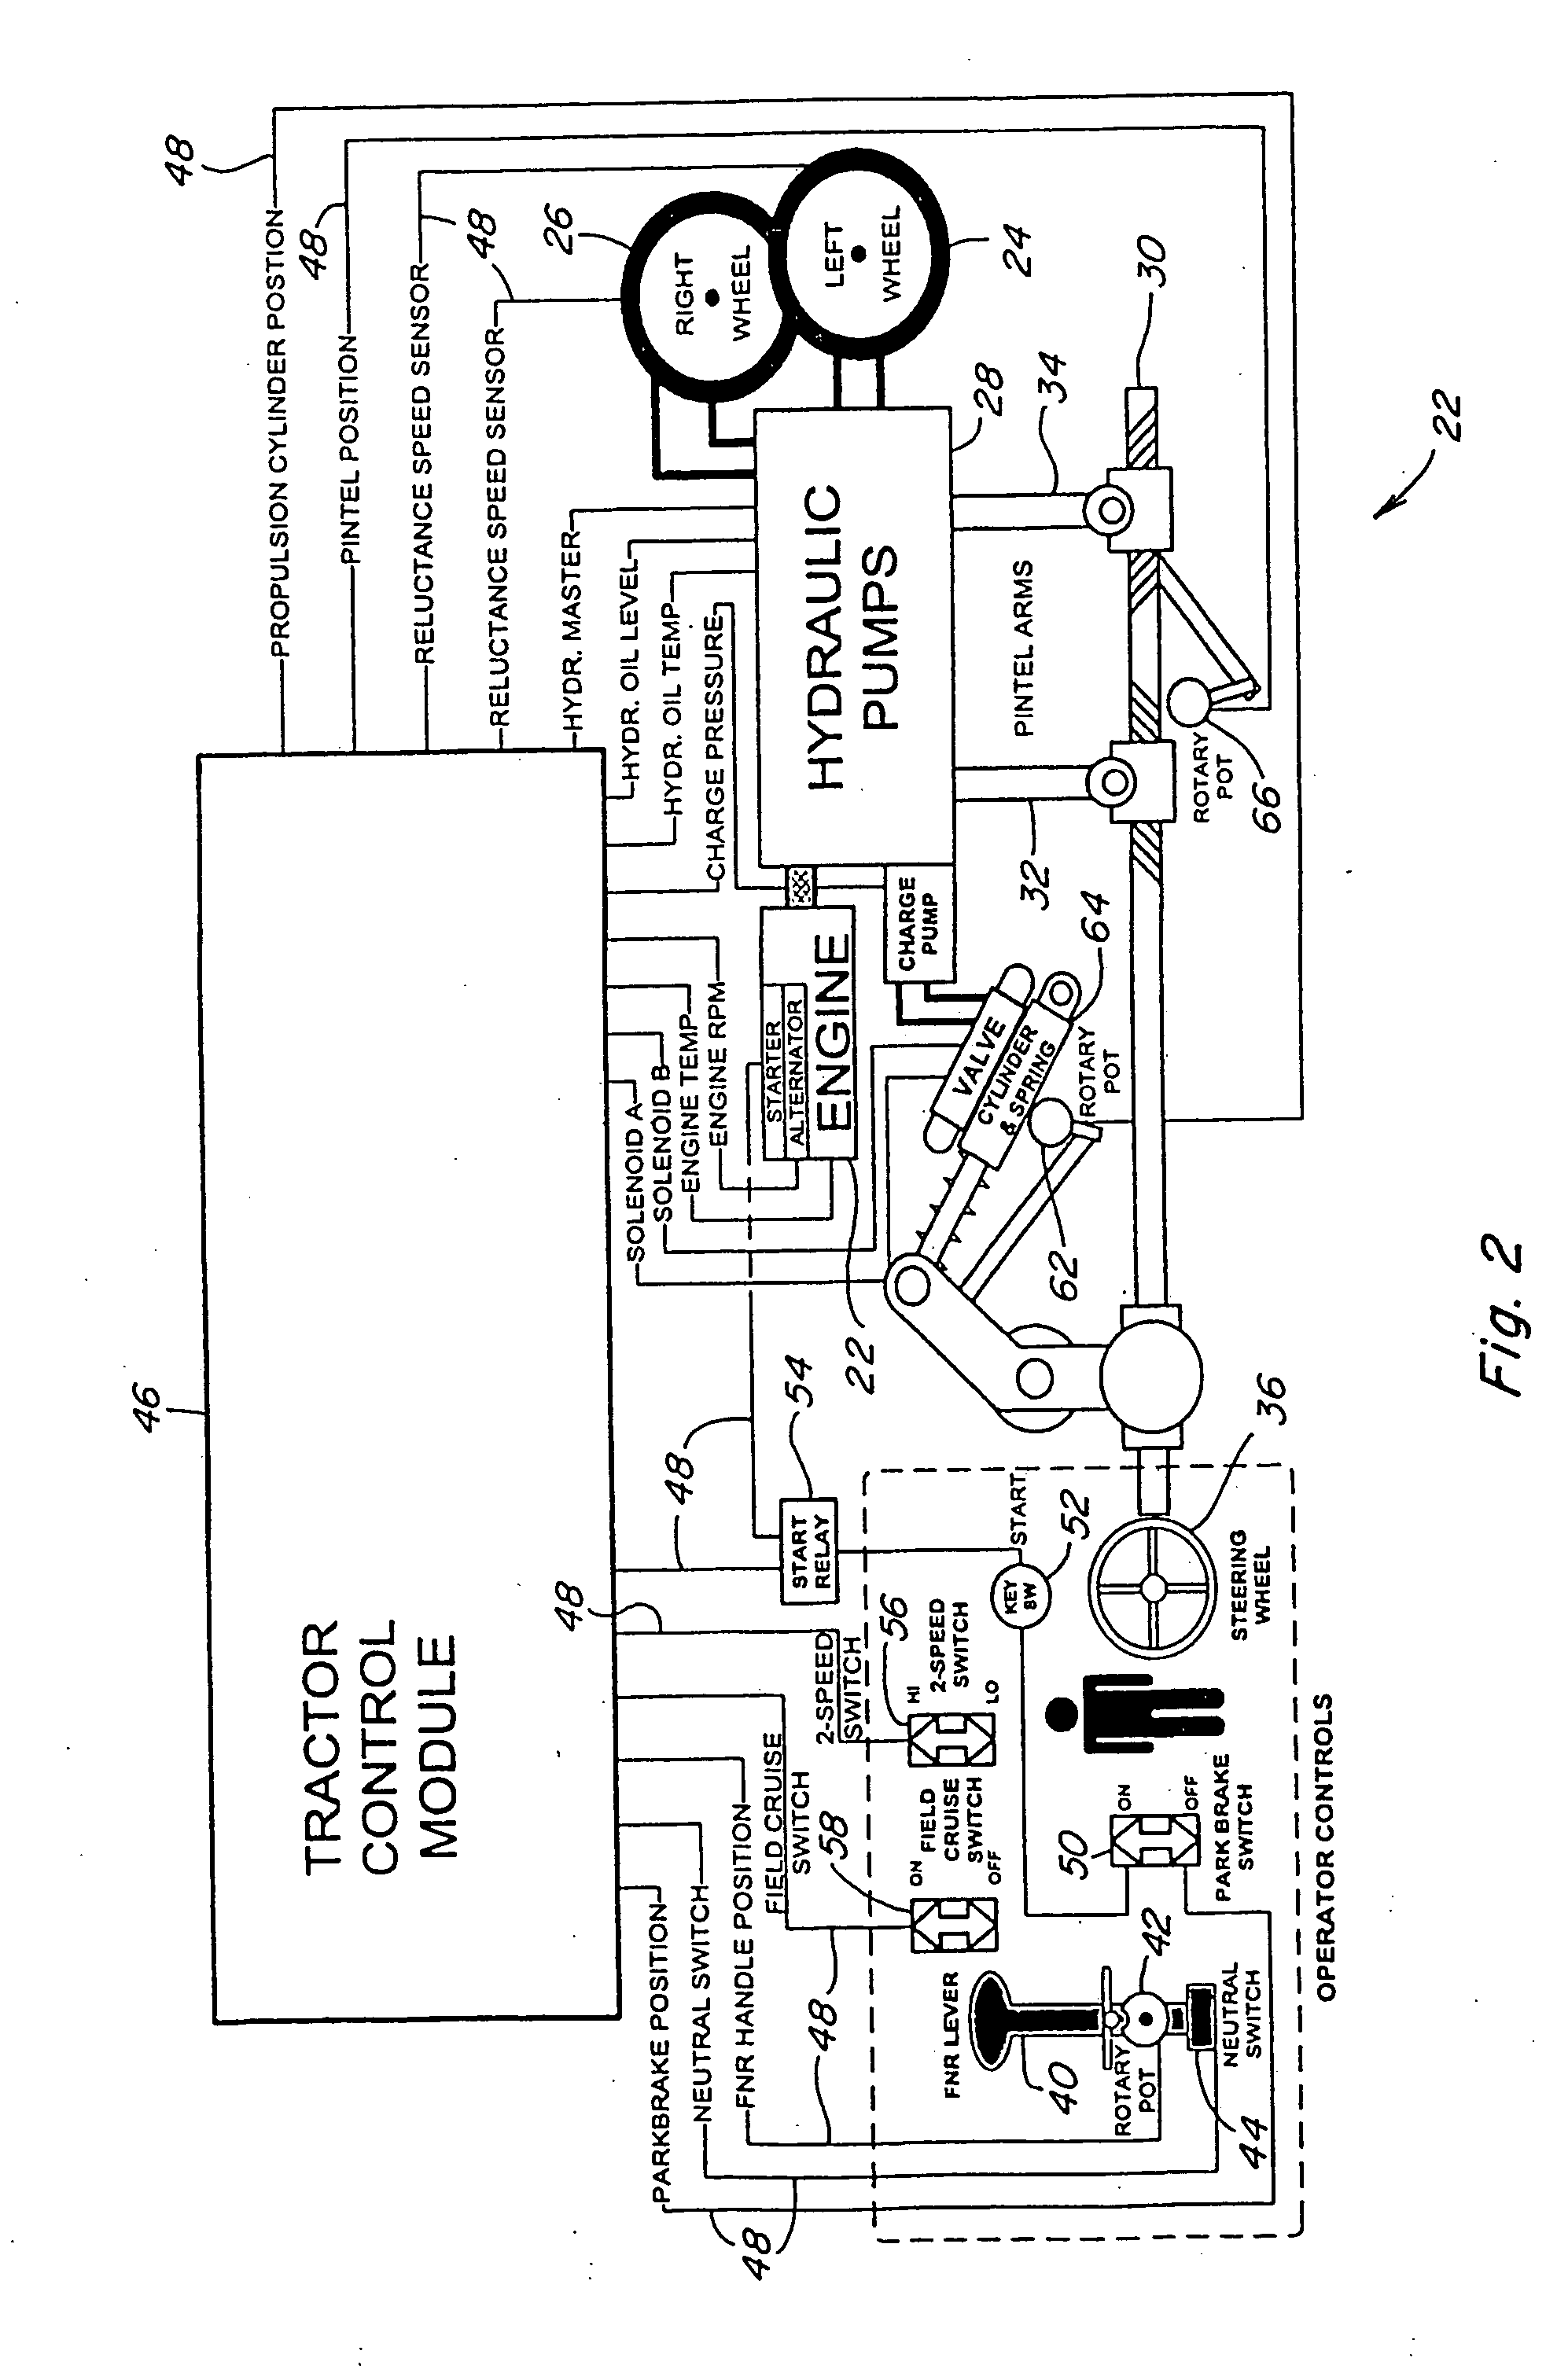 Apparatus and method providing neutral safeing for the propulsion system of an agricultural windrower